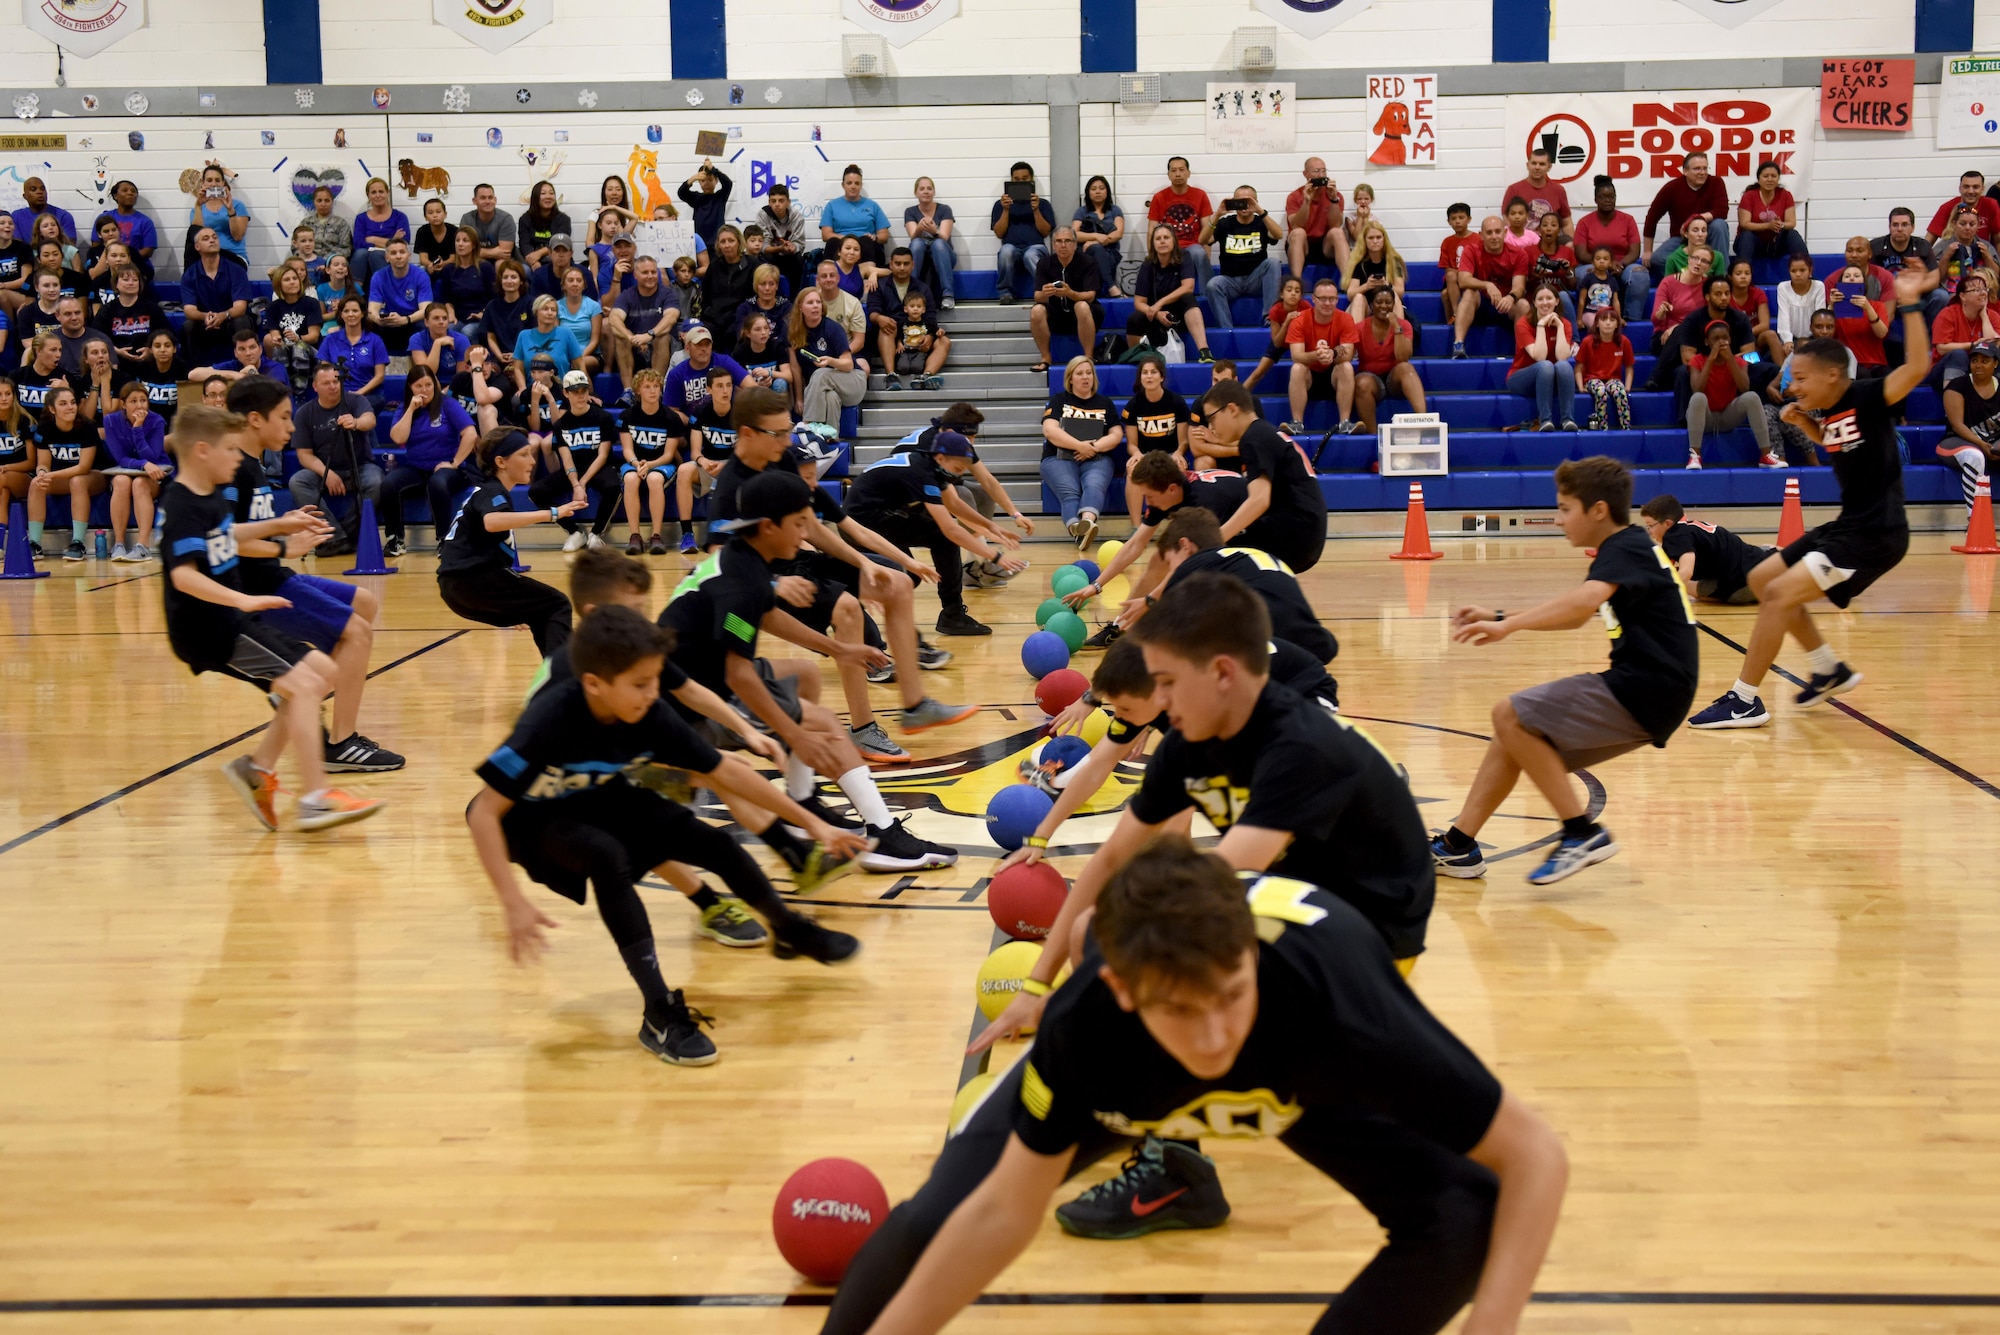 Students speed to the starting line in a game of dodgeball during ‘The RACE’ at Royal Air Force Lakenheath, England, Aug. 14, 2017. Students and their families participated in various events from dodgeball to dance-offs. (U.S. Air Force photo by Airman 1st Class John A. Crawford)